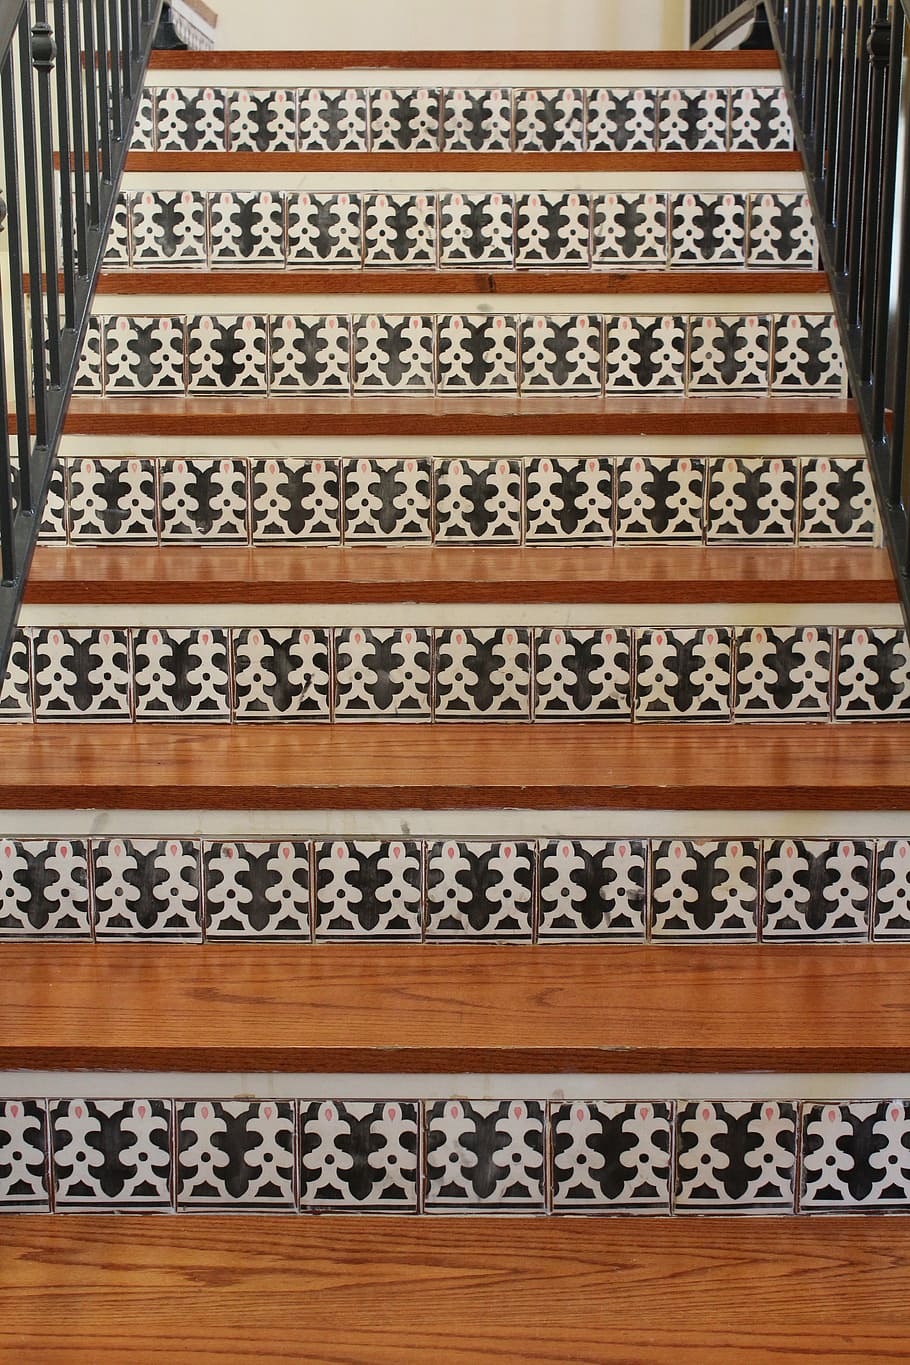 stairs, wooden, staircase, interior, design, stairway, steps, pattern, cultures, indoors